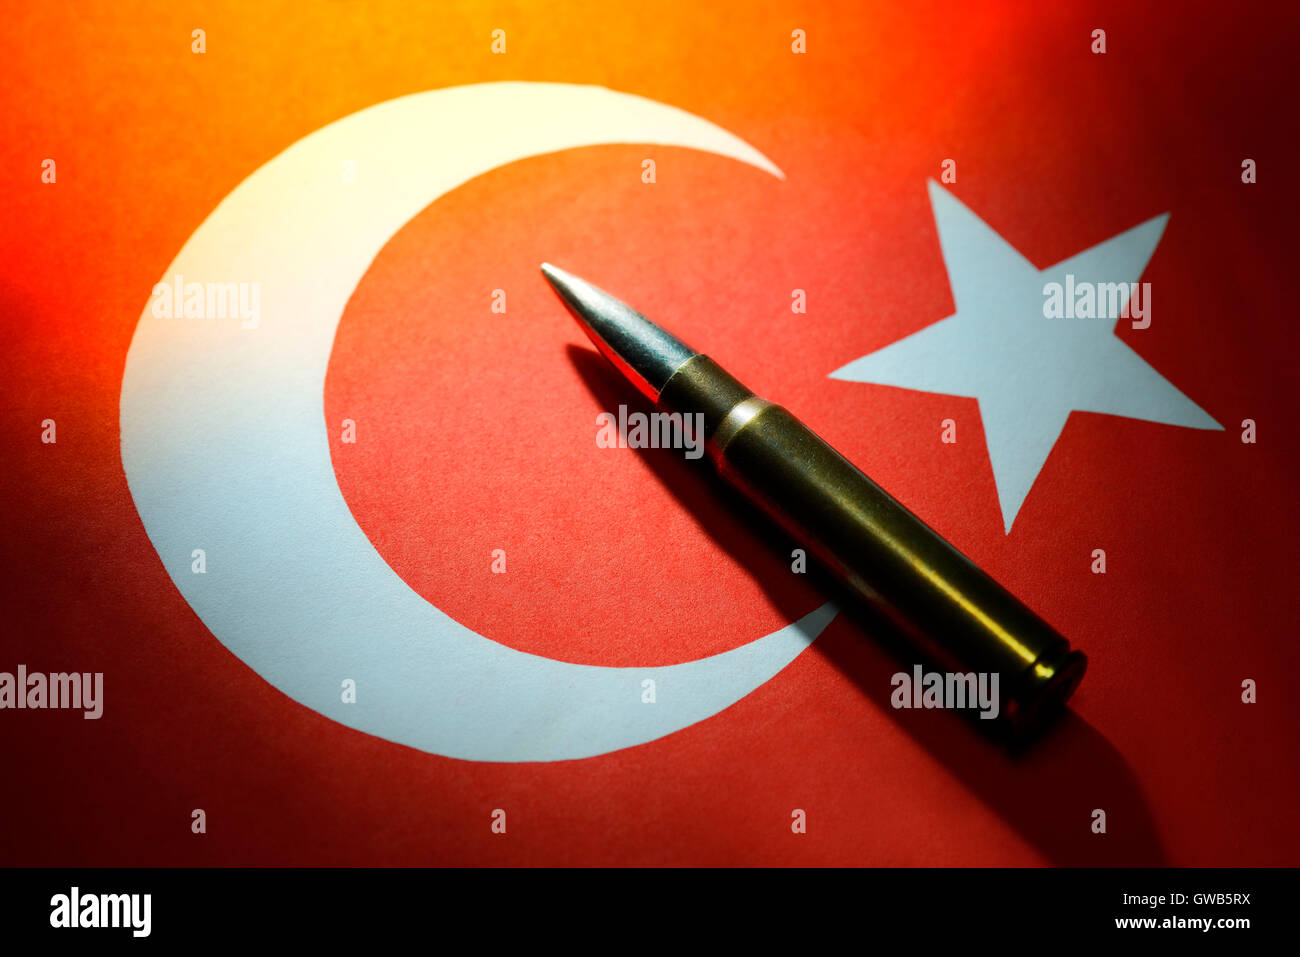 Cartridge on Turkish flag, symbolic photo for the reproach of the support of terrorist groupings, Patrone auf tuerkischer Fahne, Stock Photo